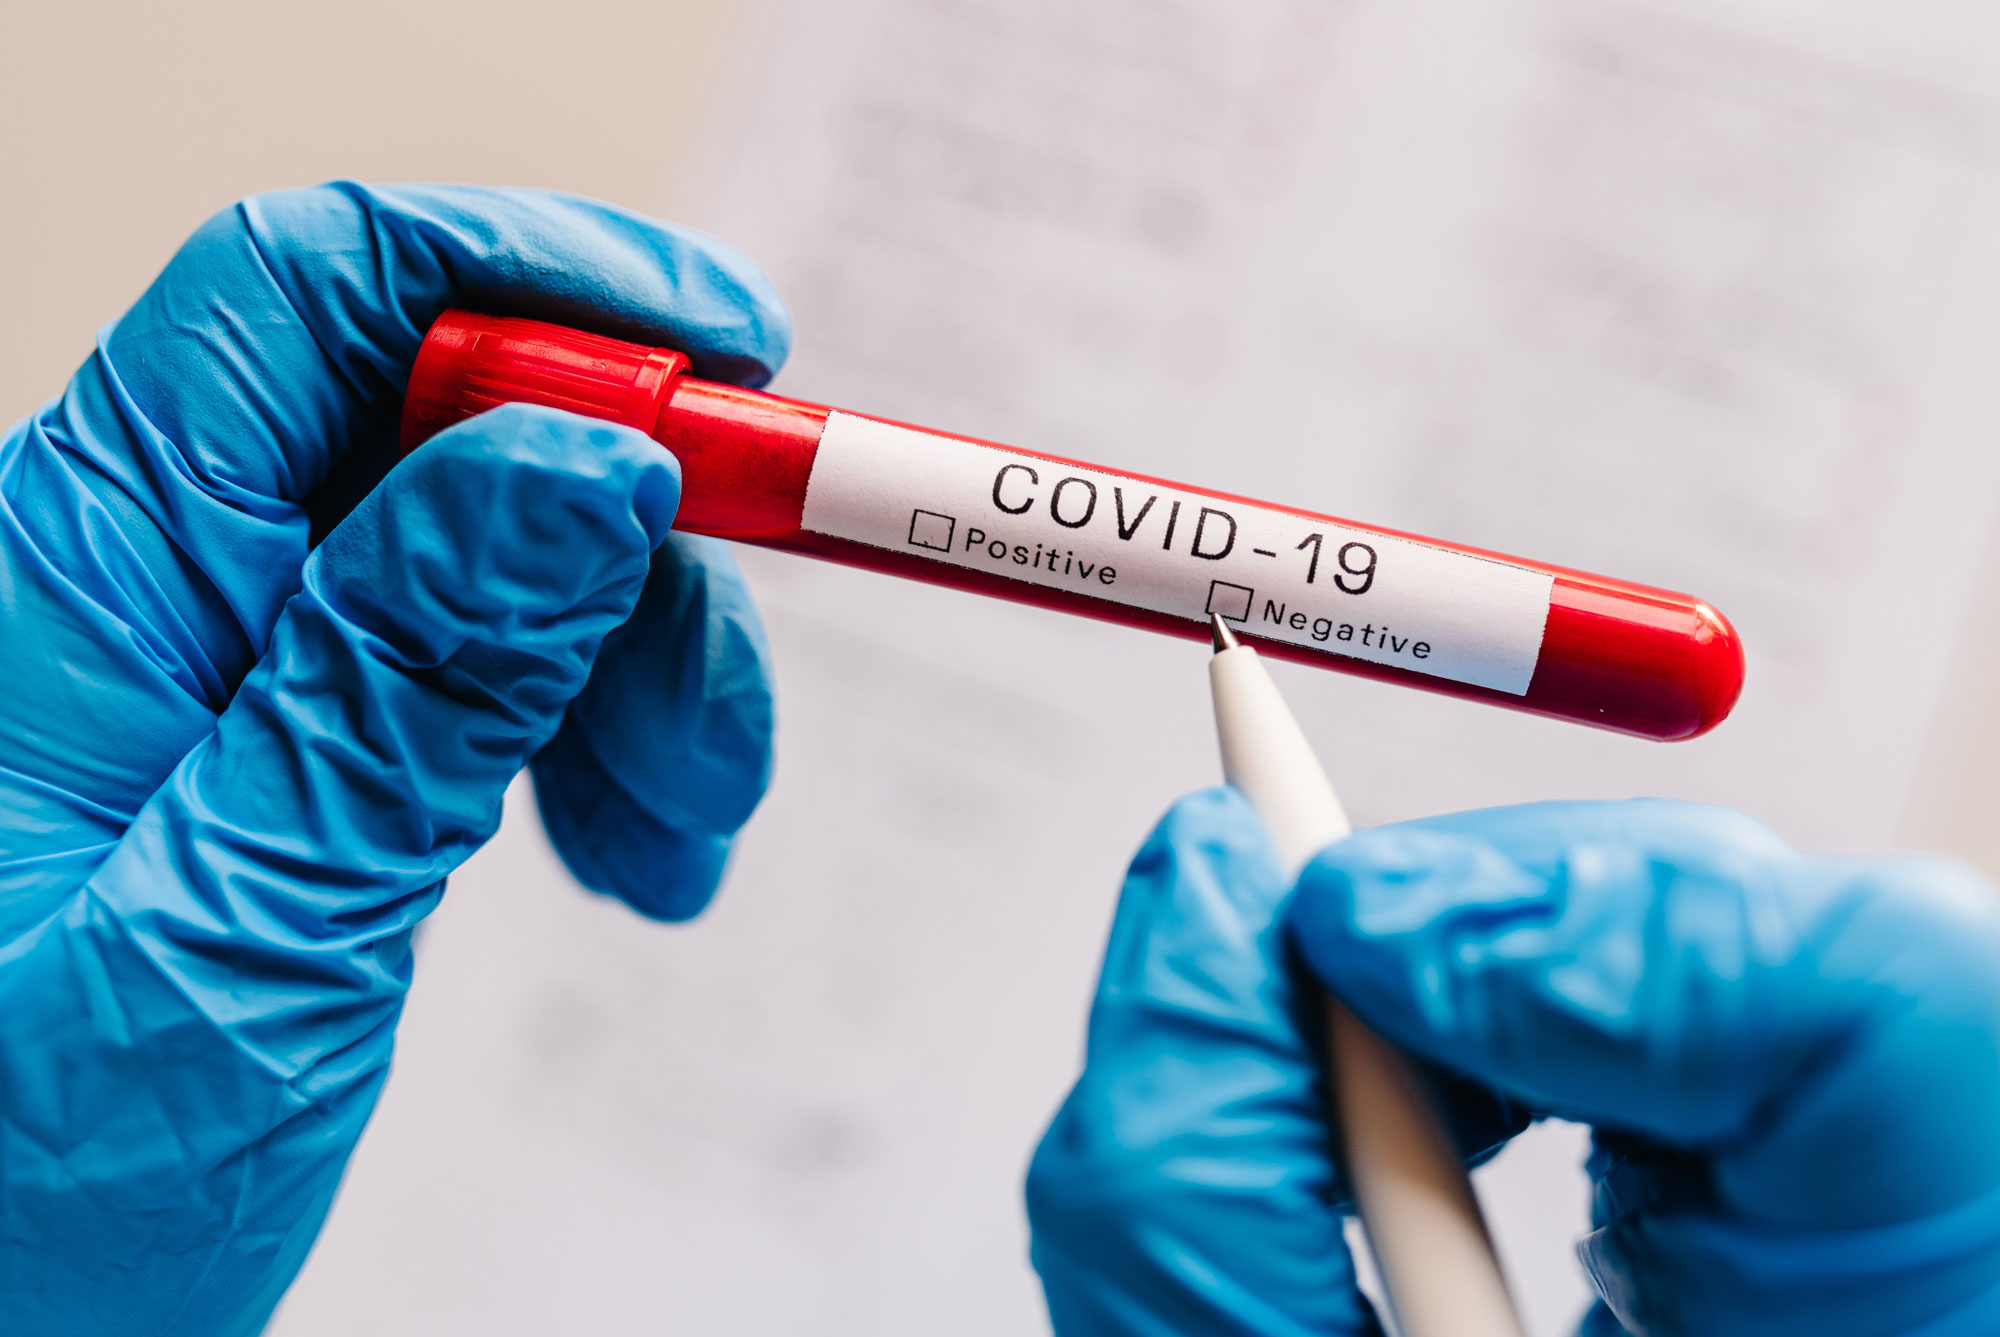 Covid-19 blood test being marked negative